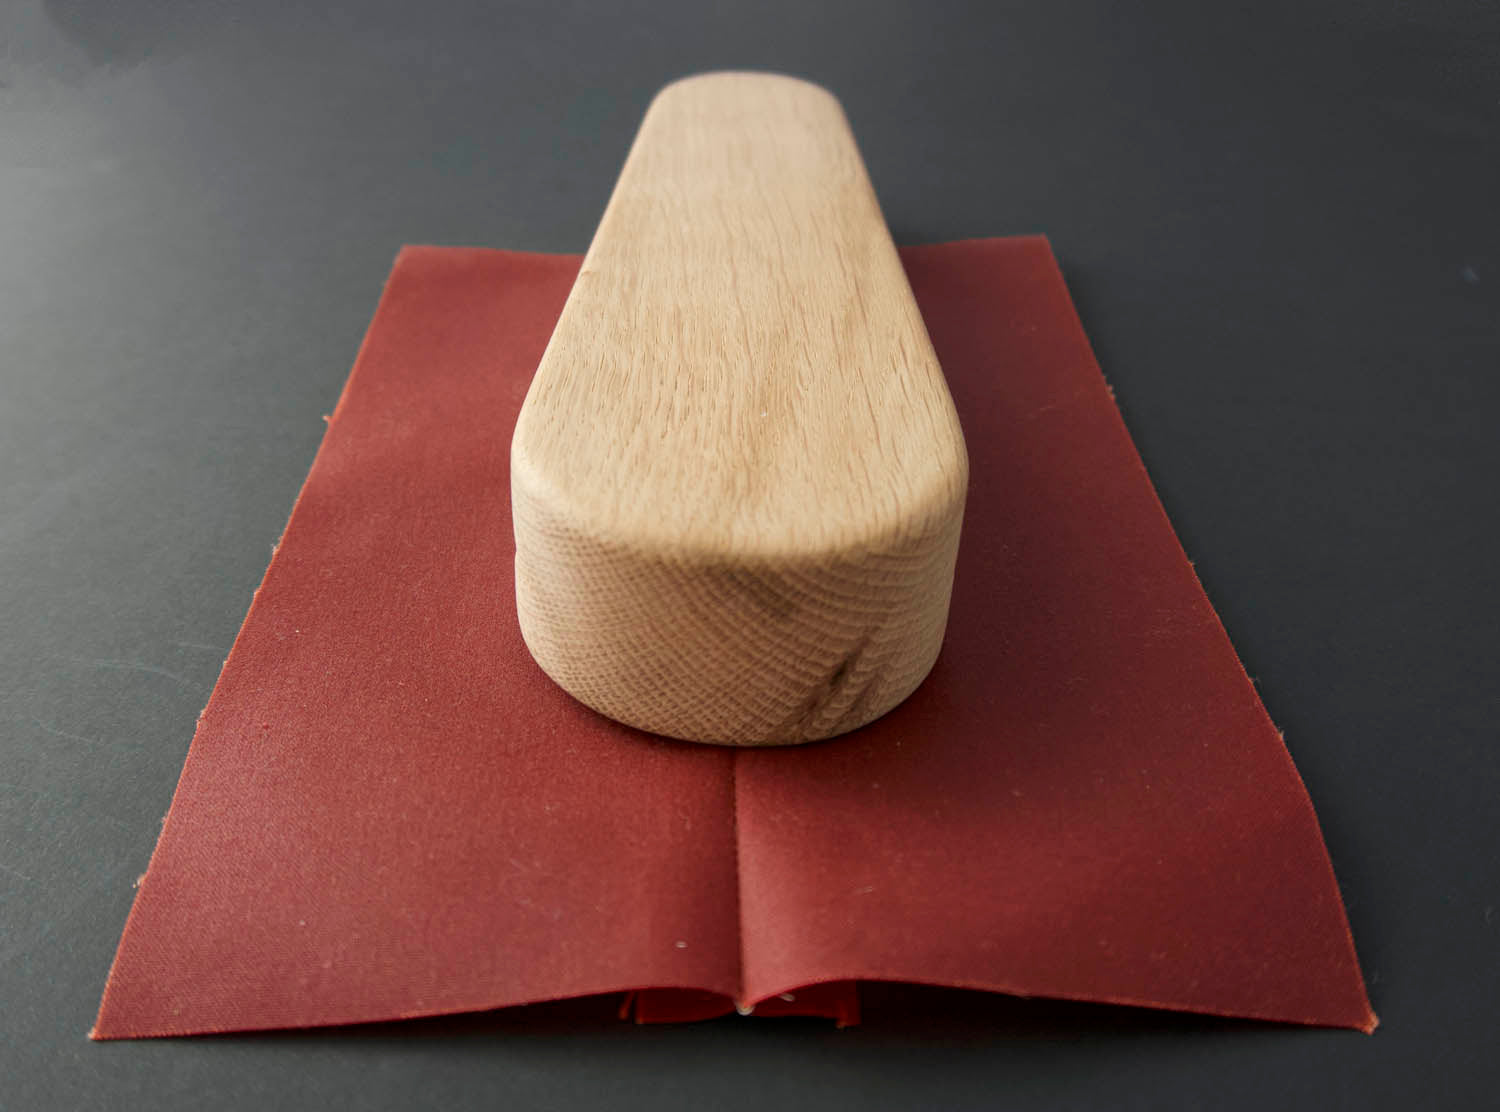 a wooden clapper sat on top of traditional oilskin to press open the seam